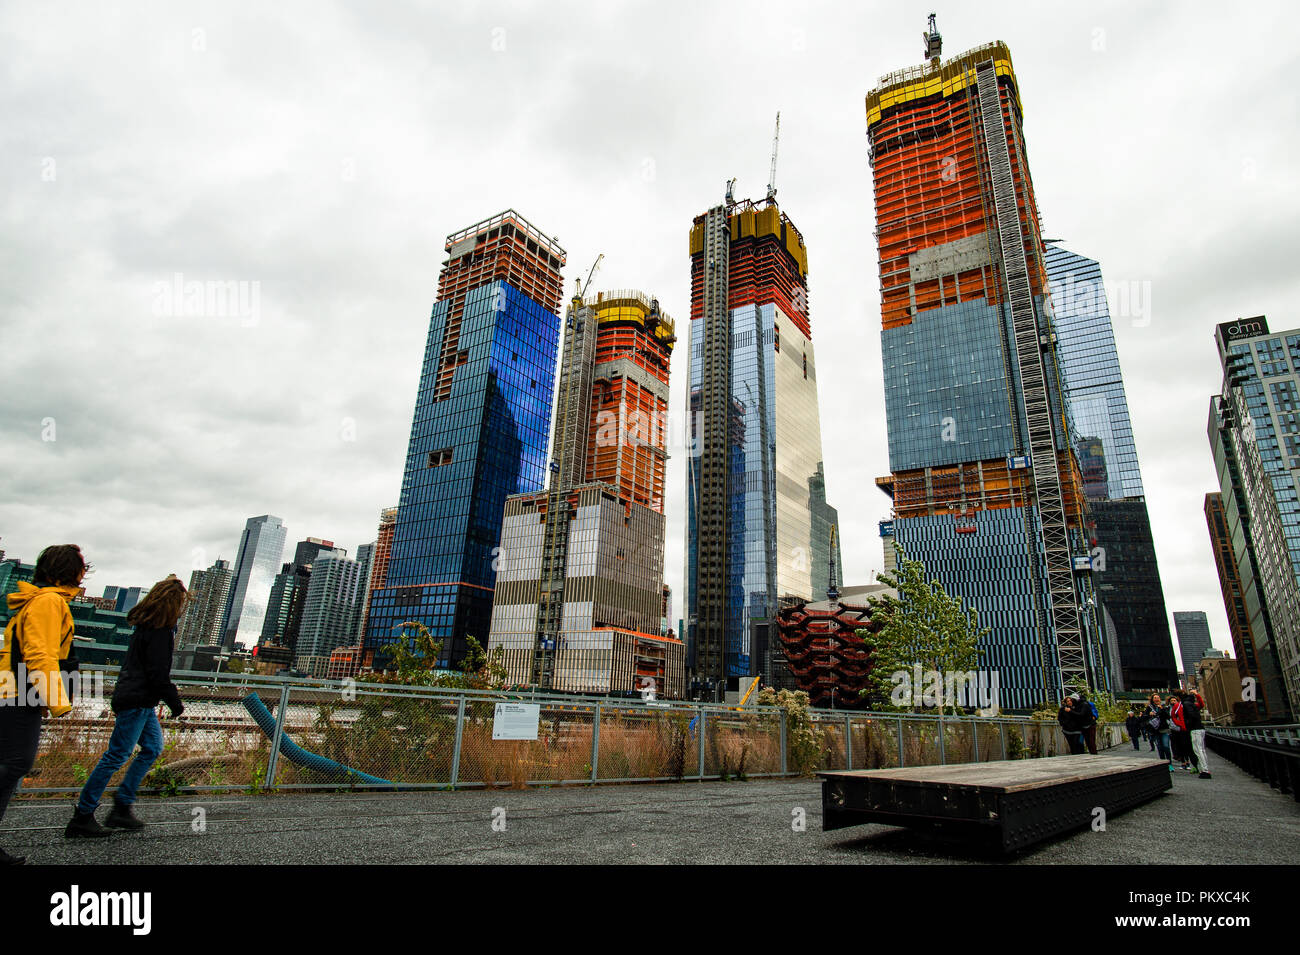 New York, USA, October 30, 2017: Hudson Yards train depot from the High Line. New York City skyline with urban skyscrapers in construction. View from  Stock Photo